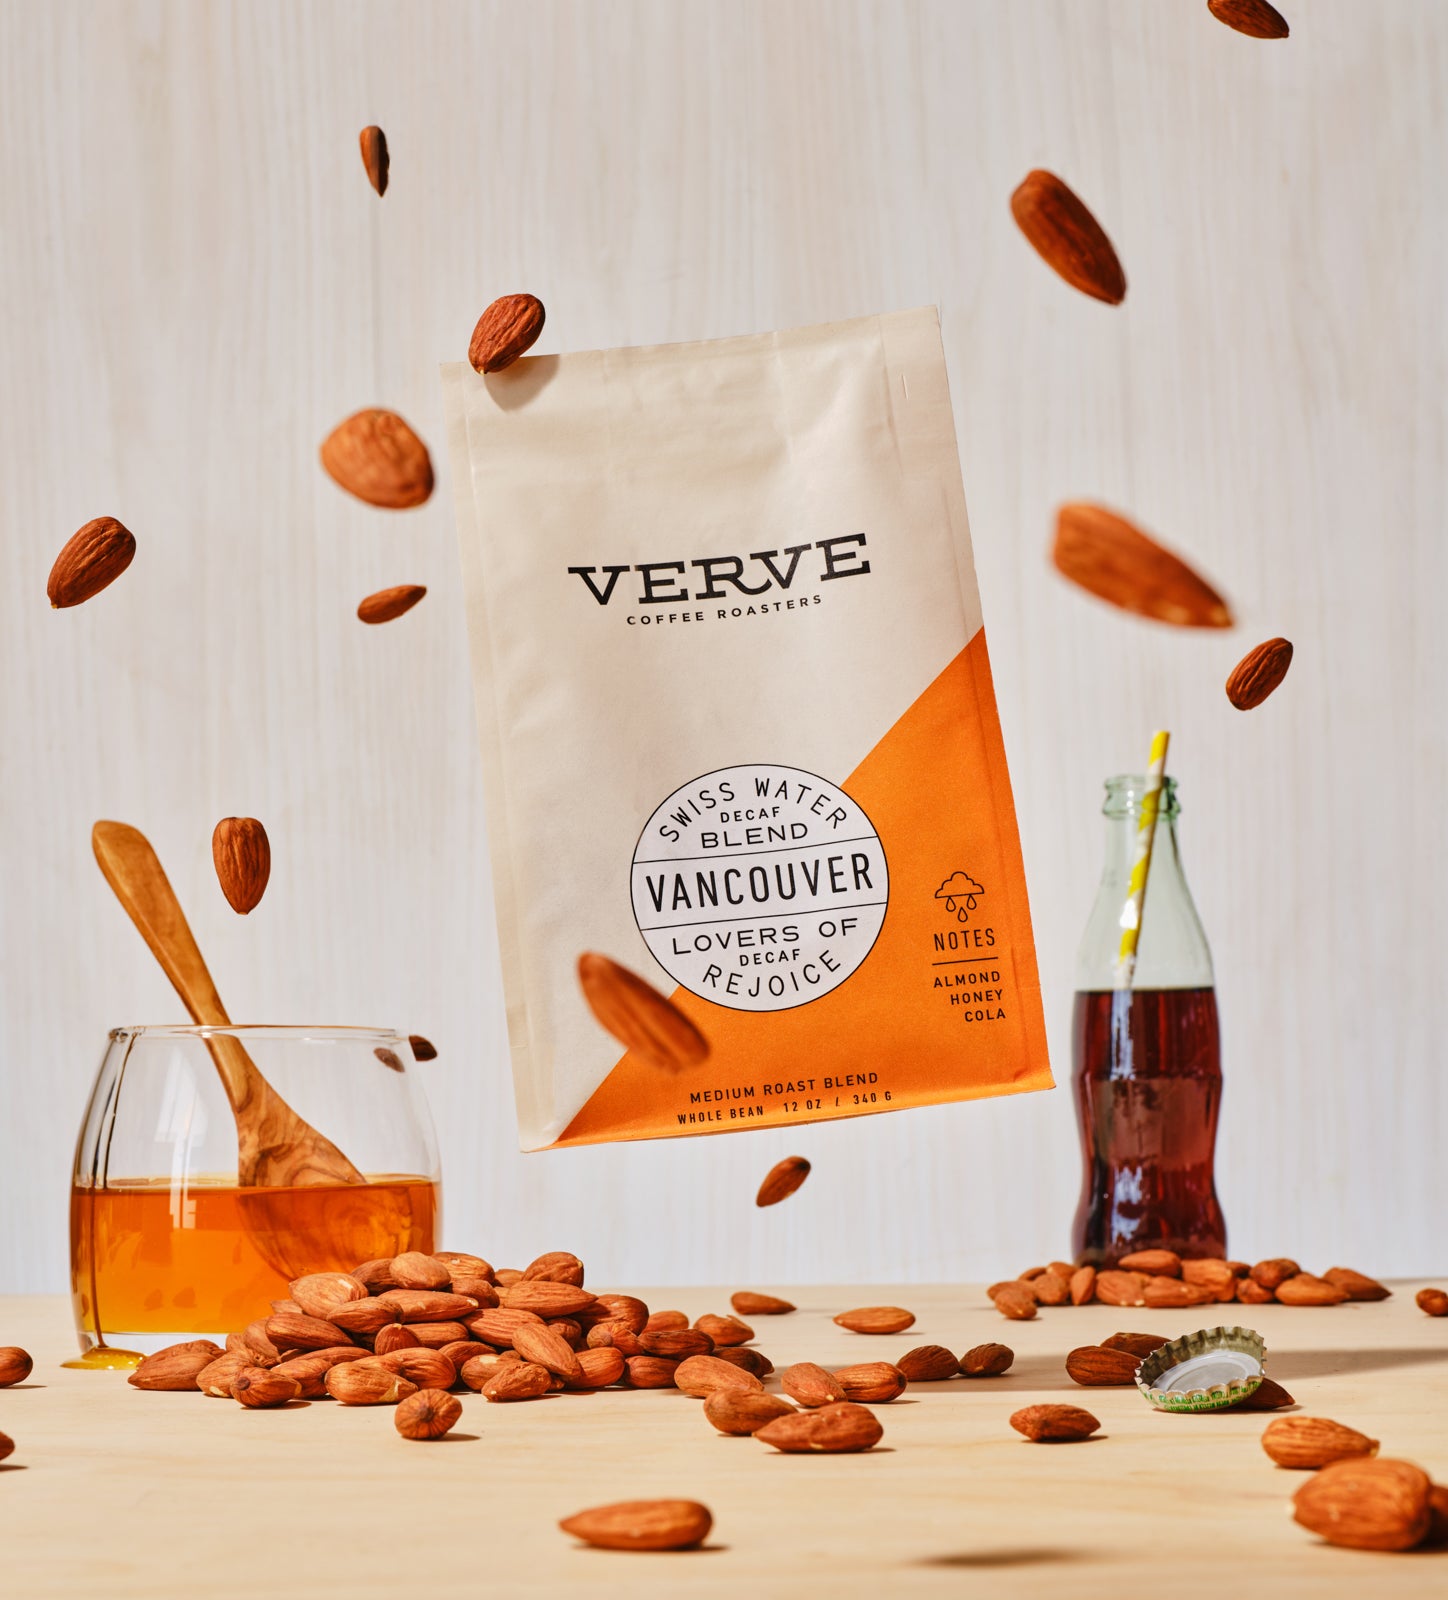 Vancouver swiss water decaf whole bean with tasting notes of almond, honey and cola